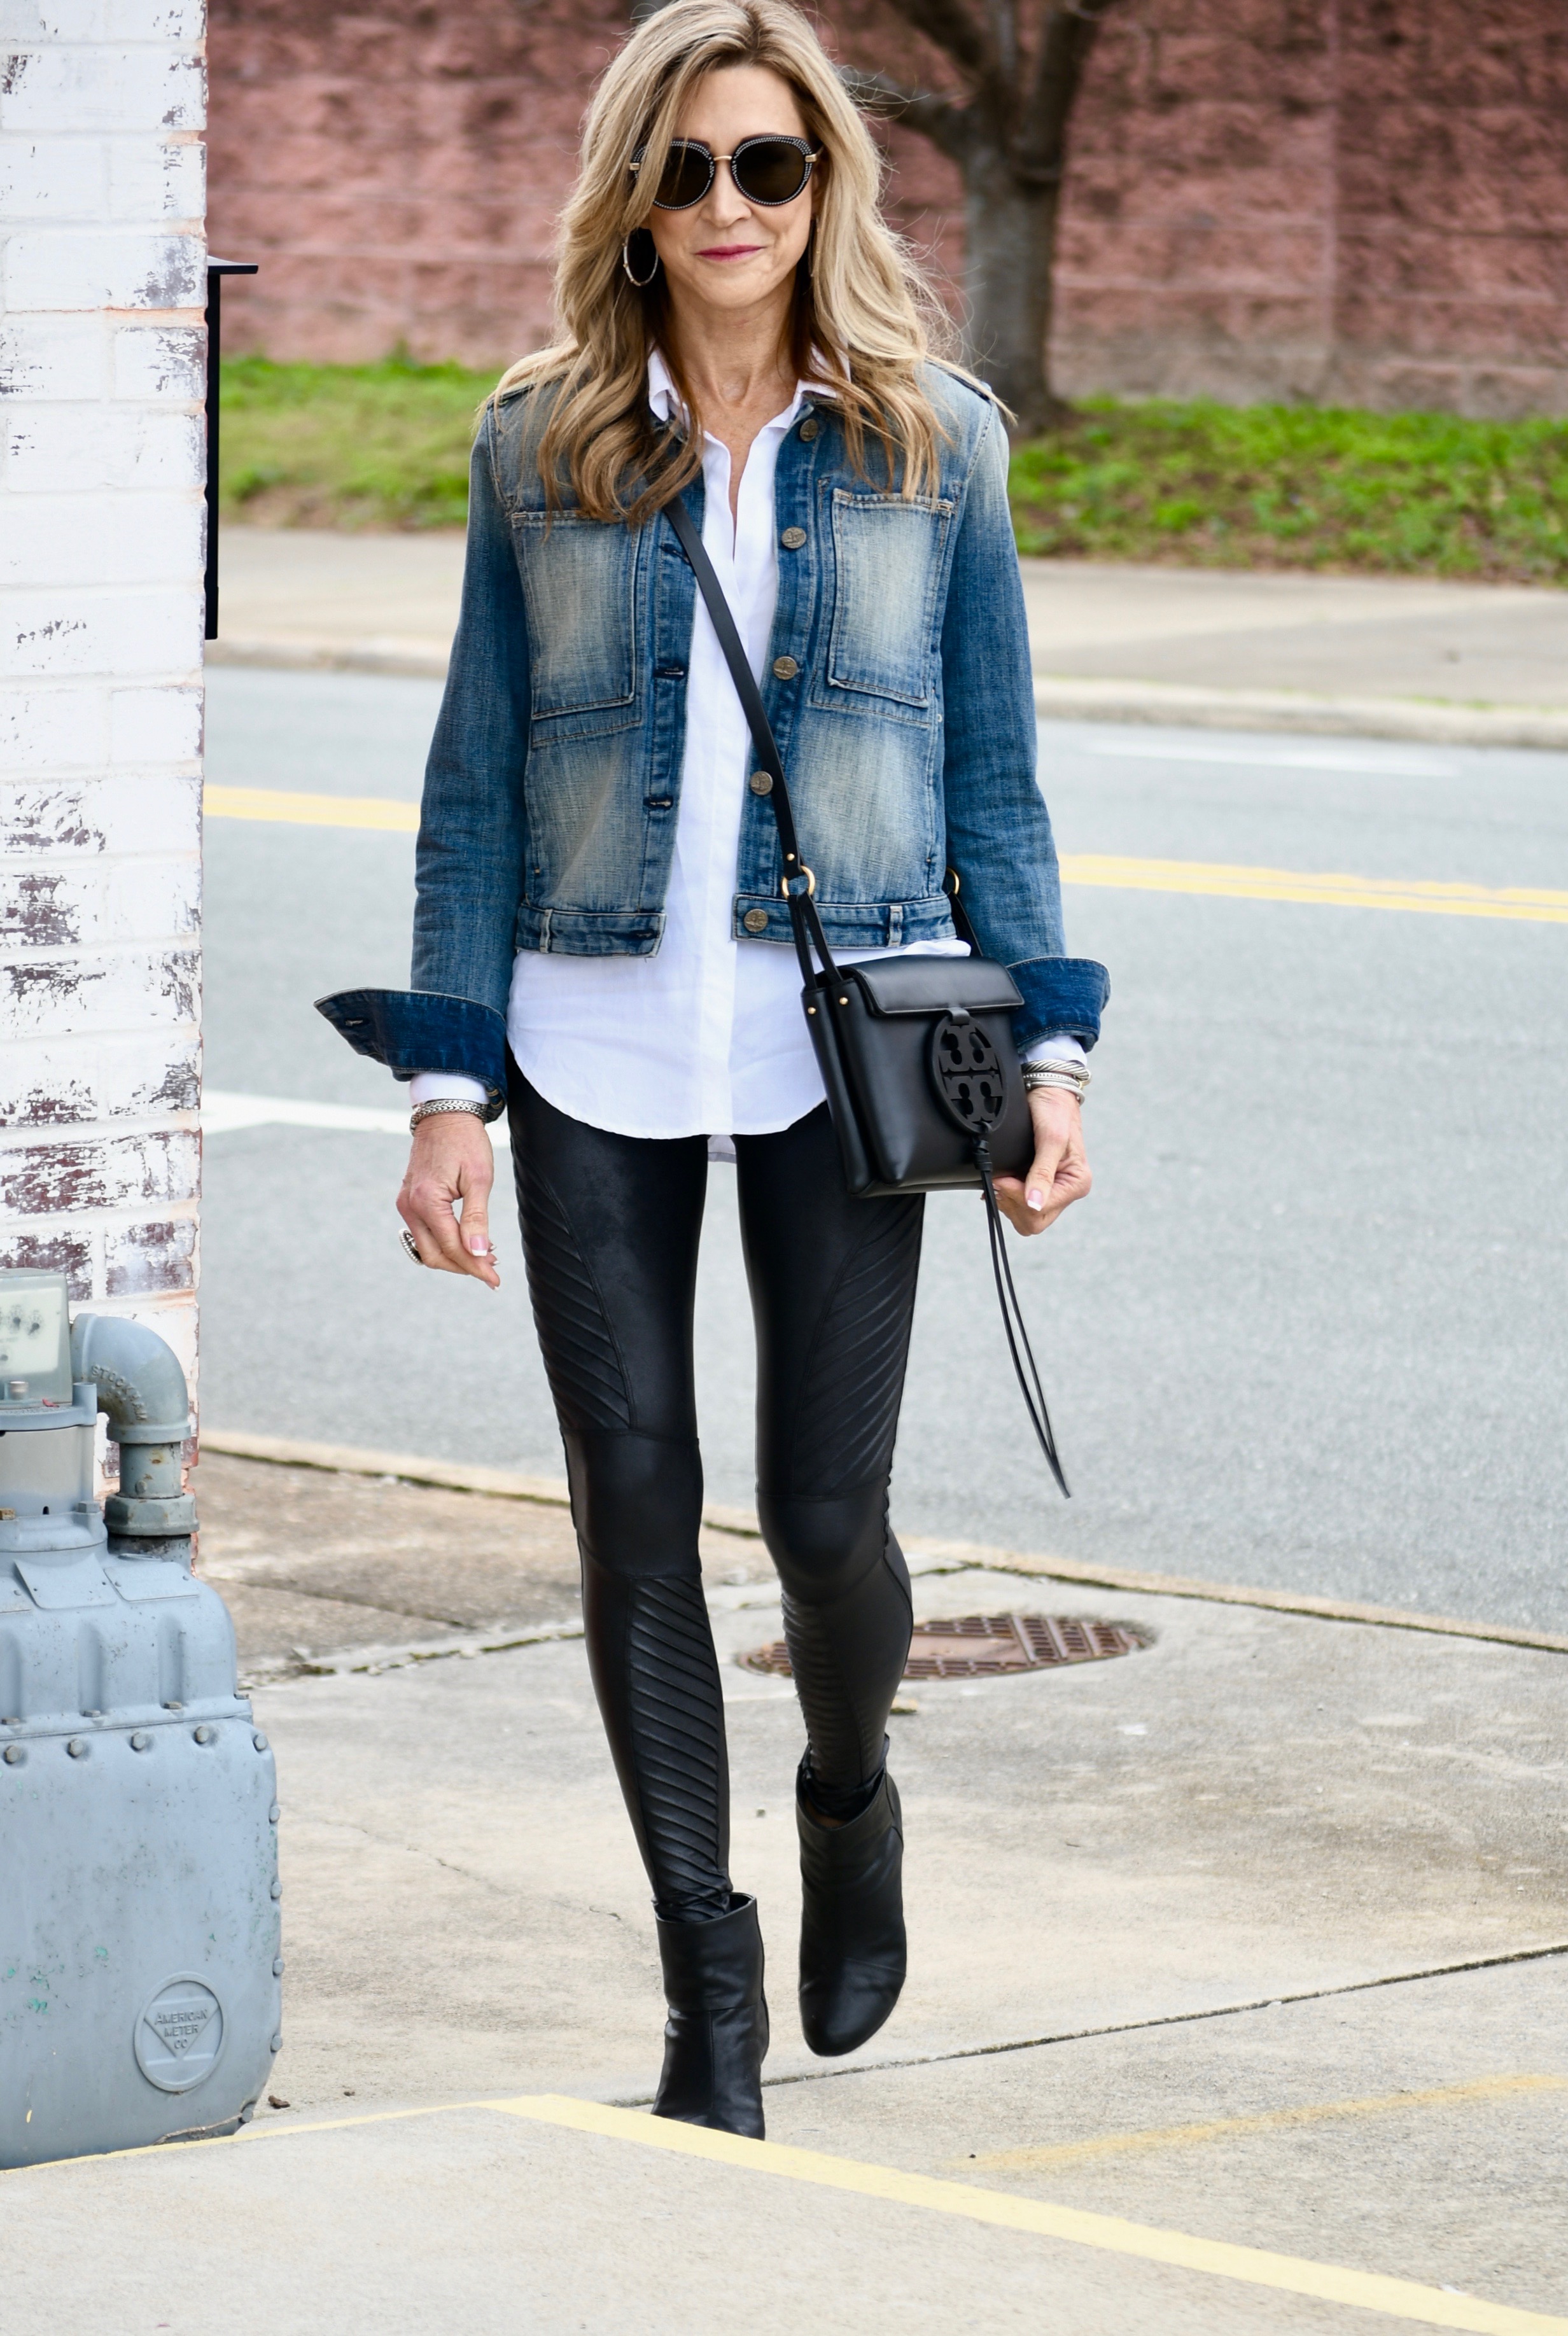 SPANX - Street style made easy with our Faux Leather Moto Leggings